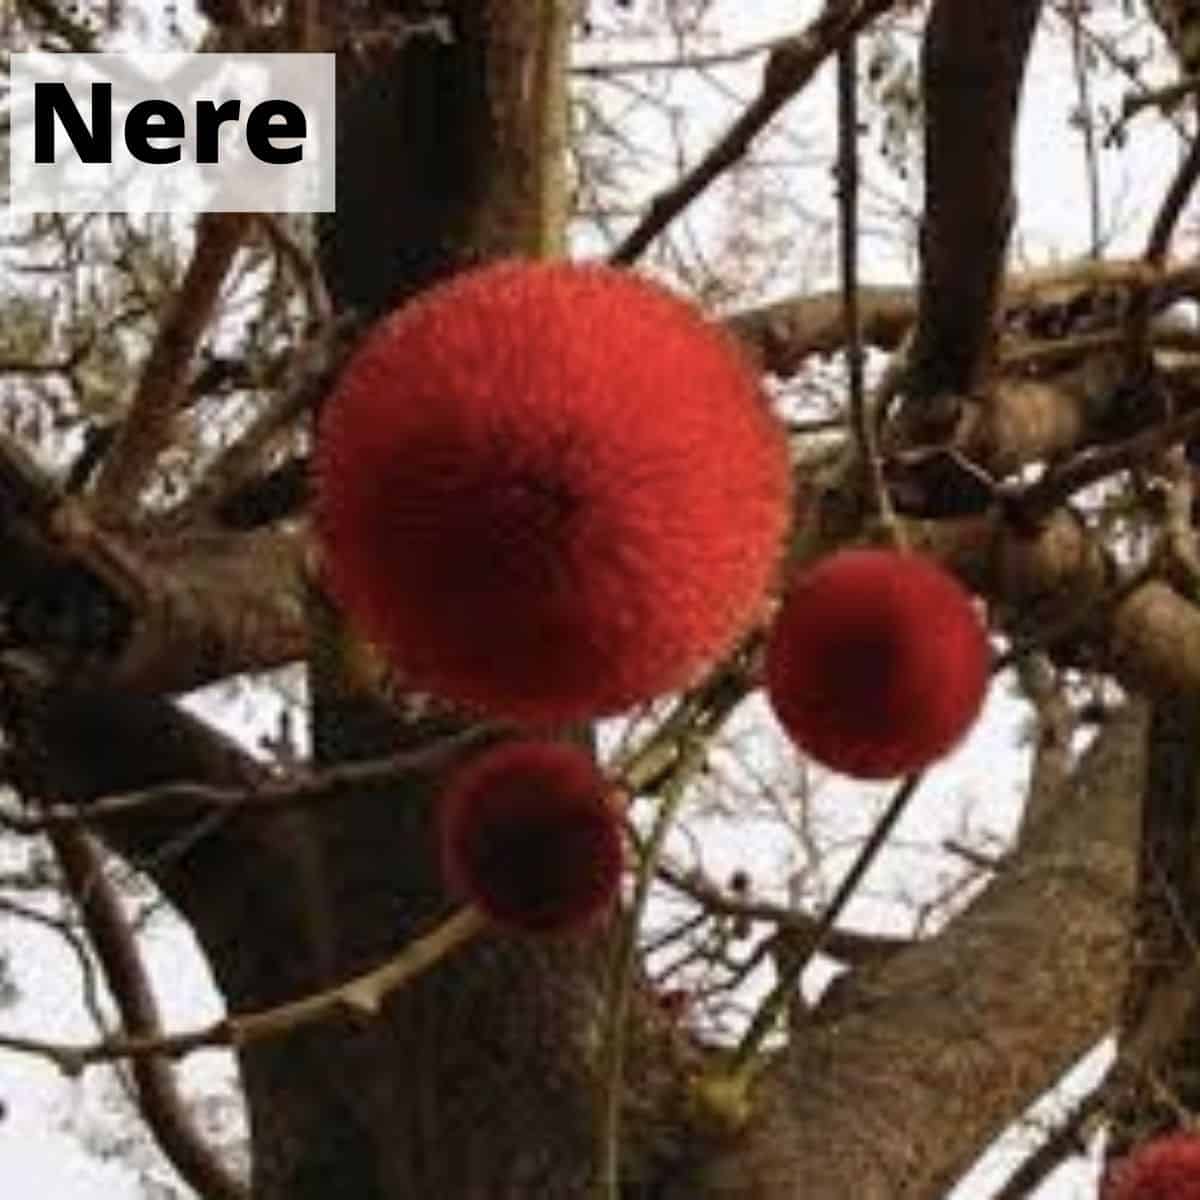 Nere pods hanging off of trees.